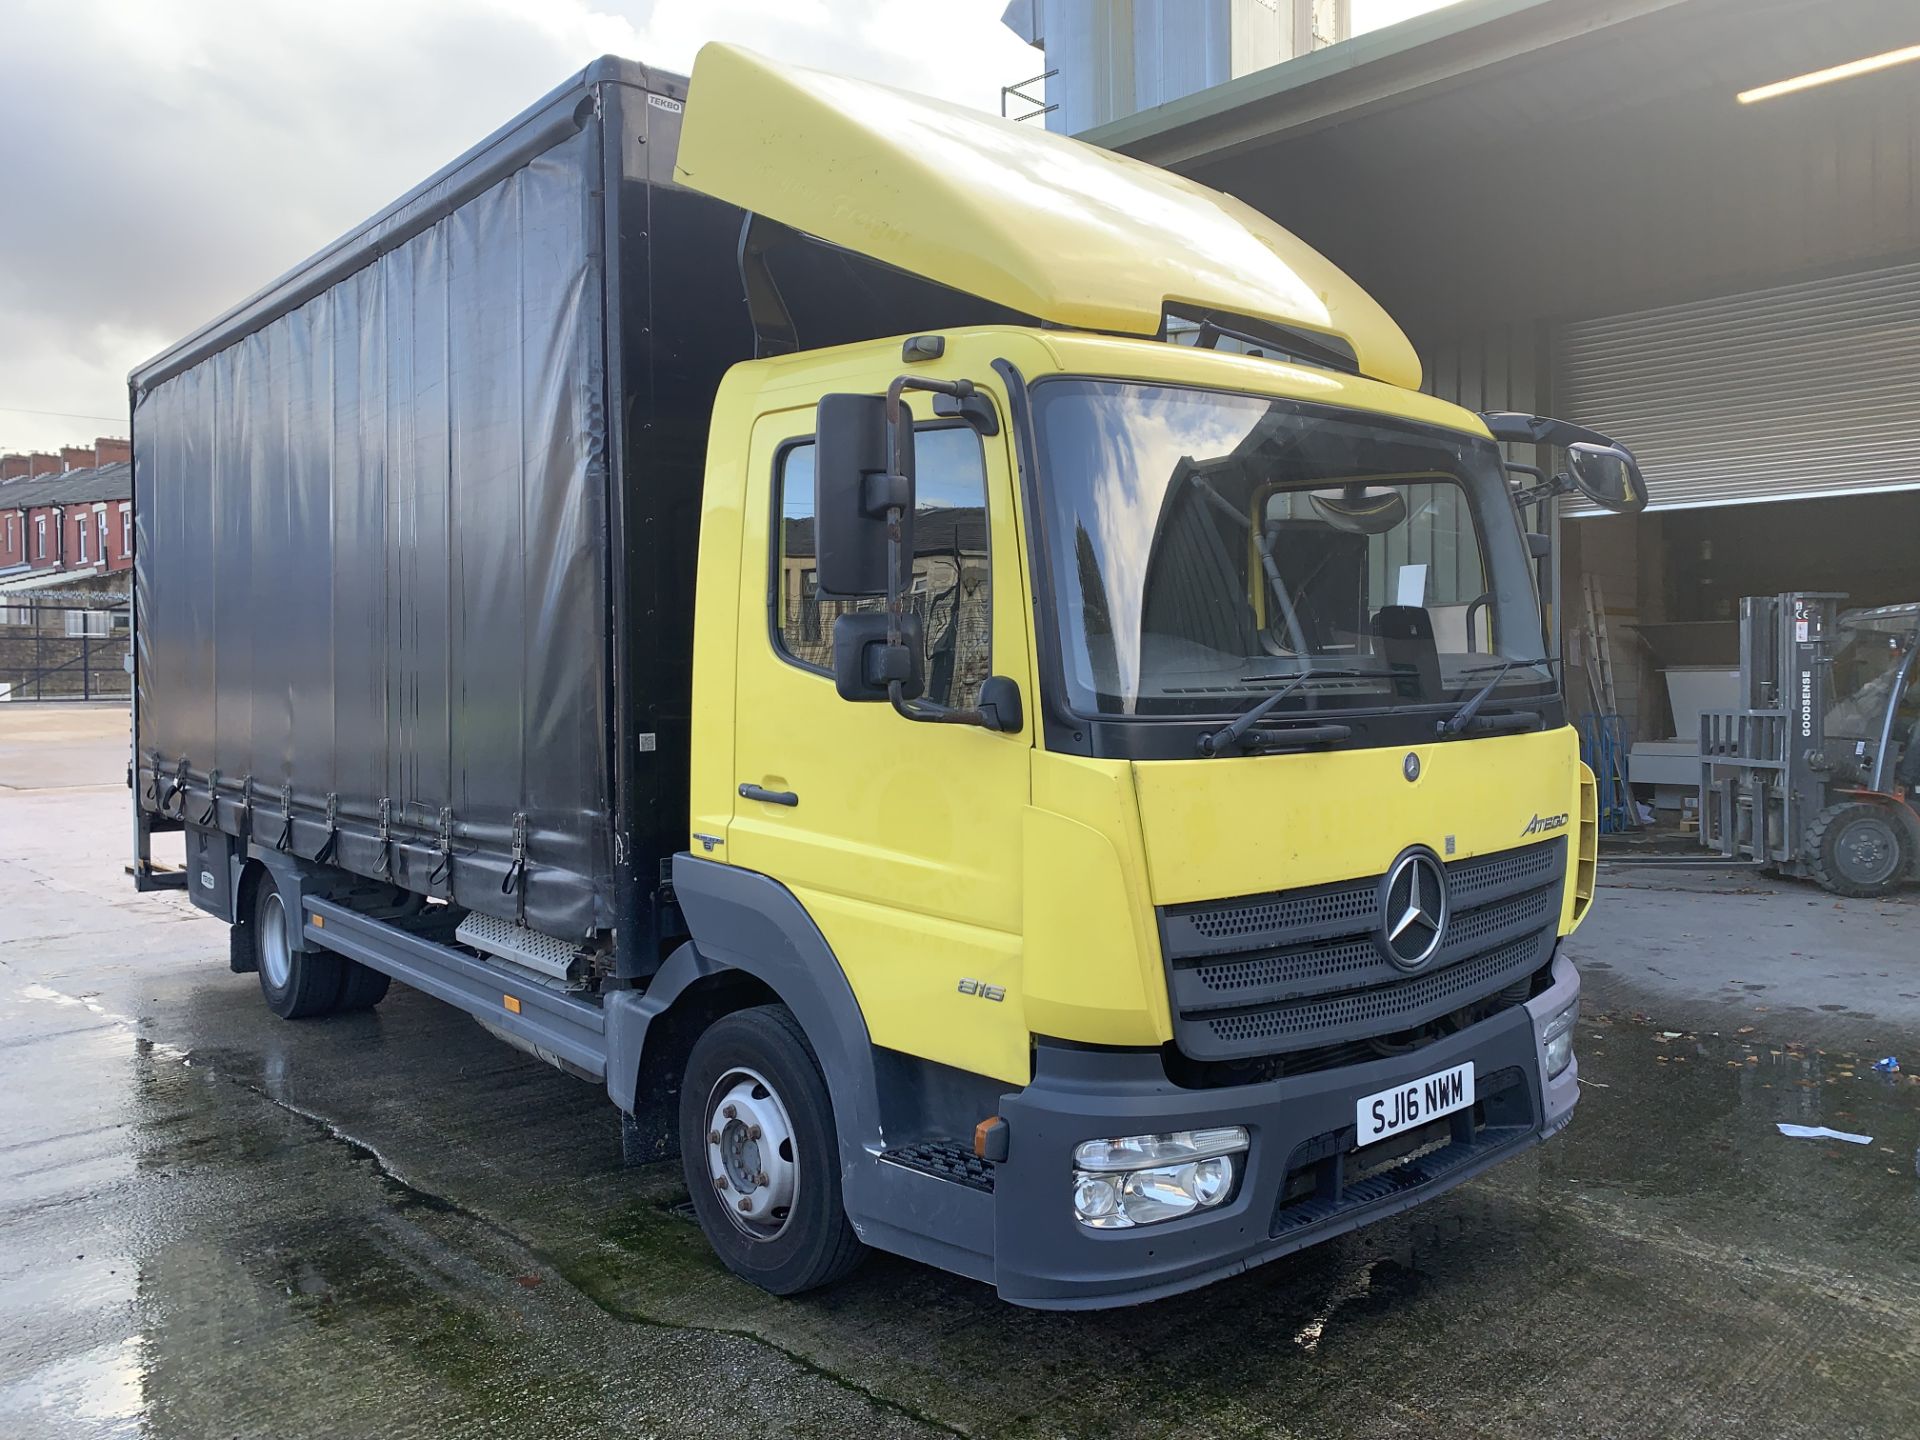 Mercedes Benz Atego 816 Curtain Sided Wagon, Registration Number SJ16 NWM, - Image 10 of 14